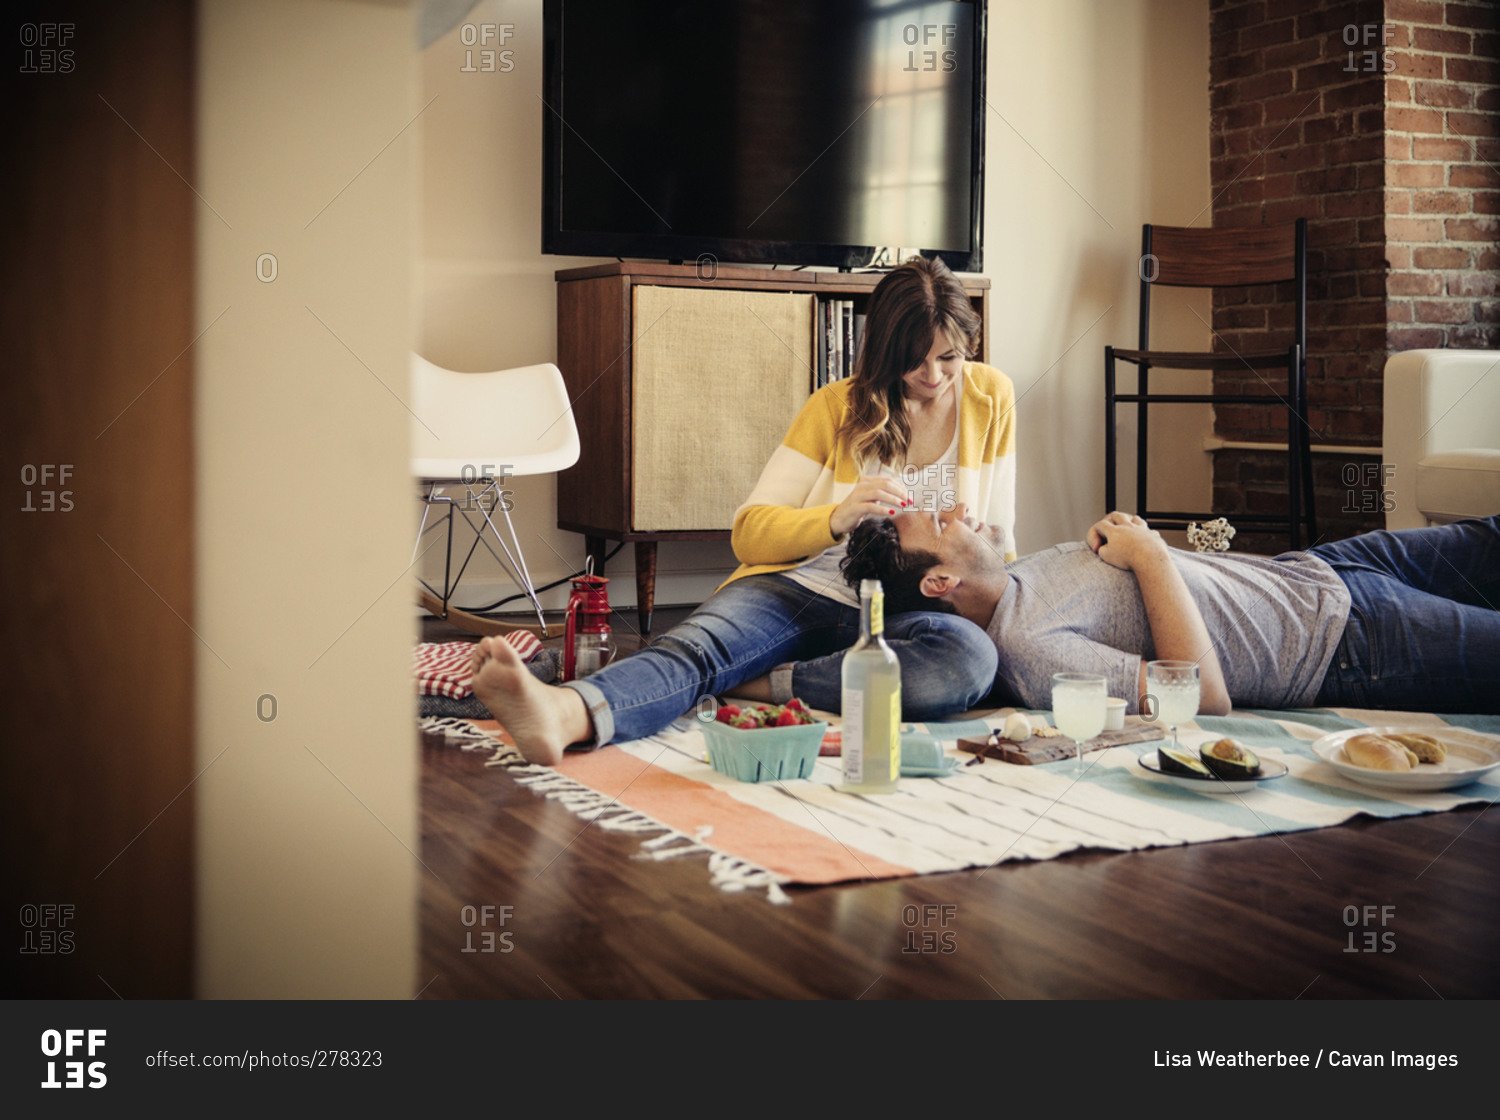 Couple having a picnic on their living room floor